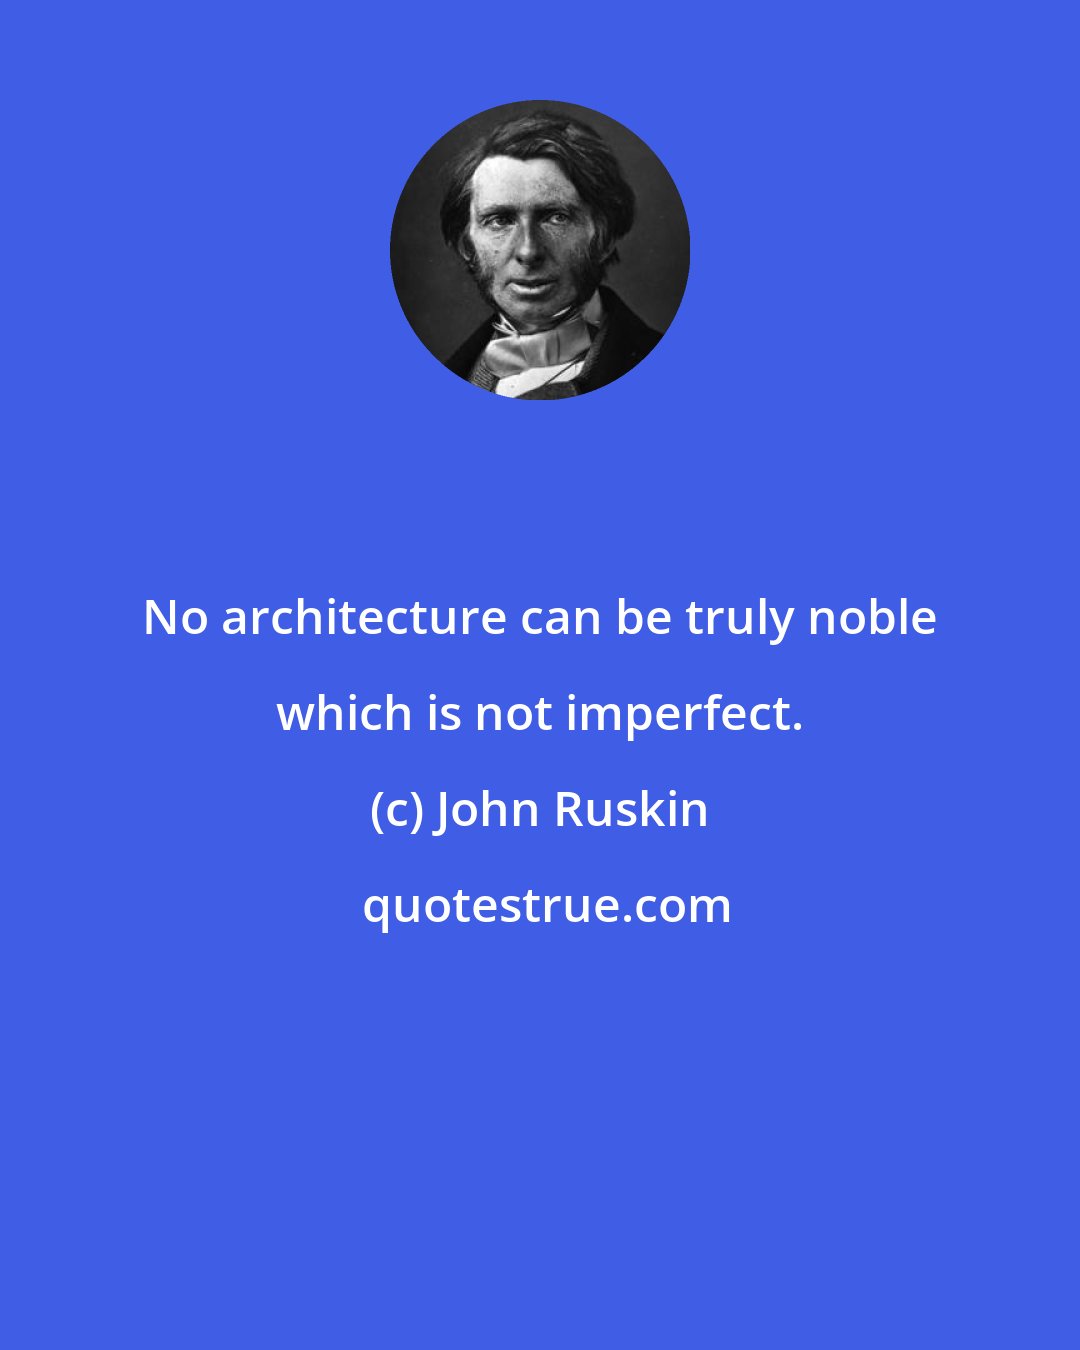 John Ruskin: No architecture can be truly noble which is not imperfect.